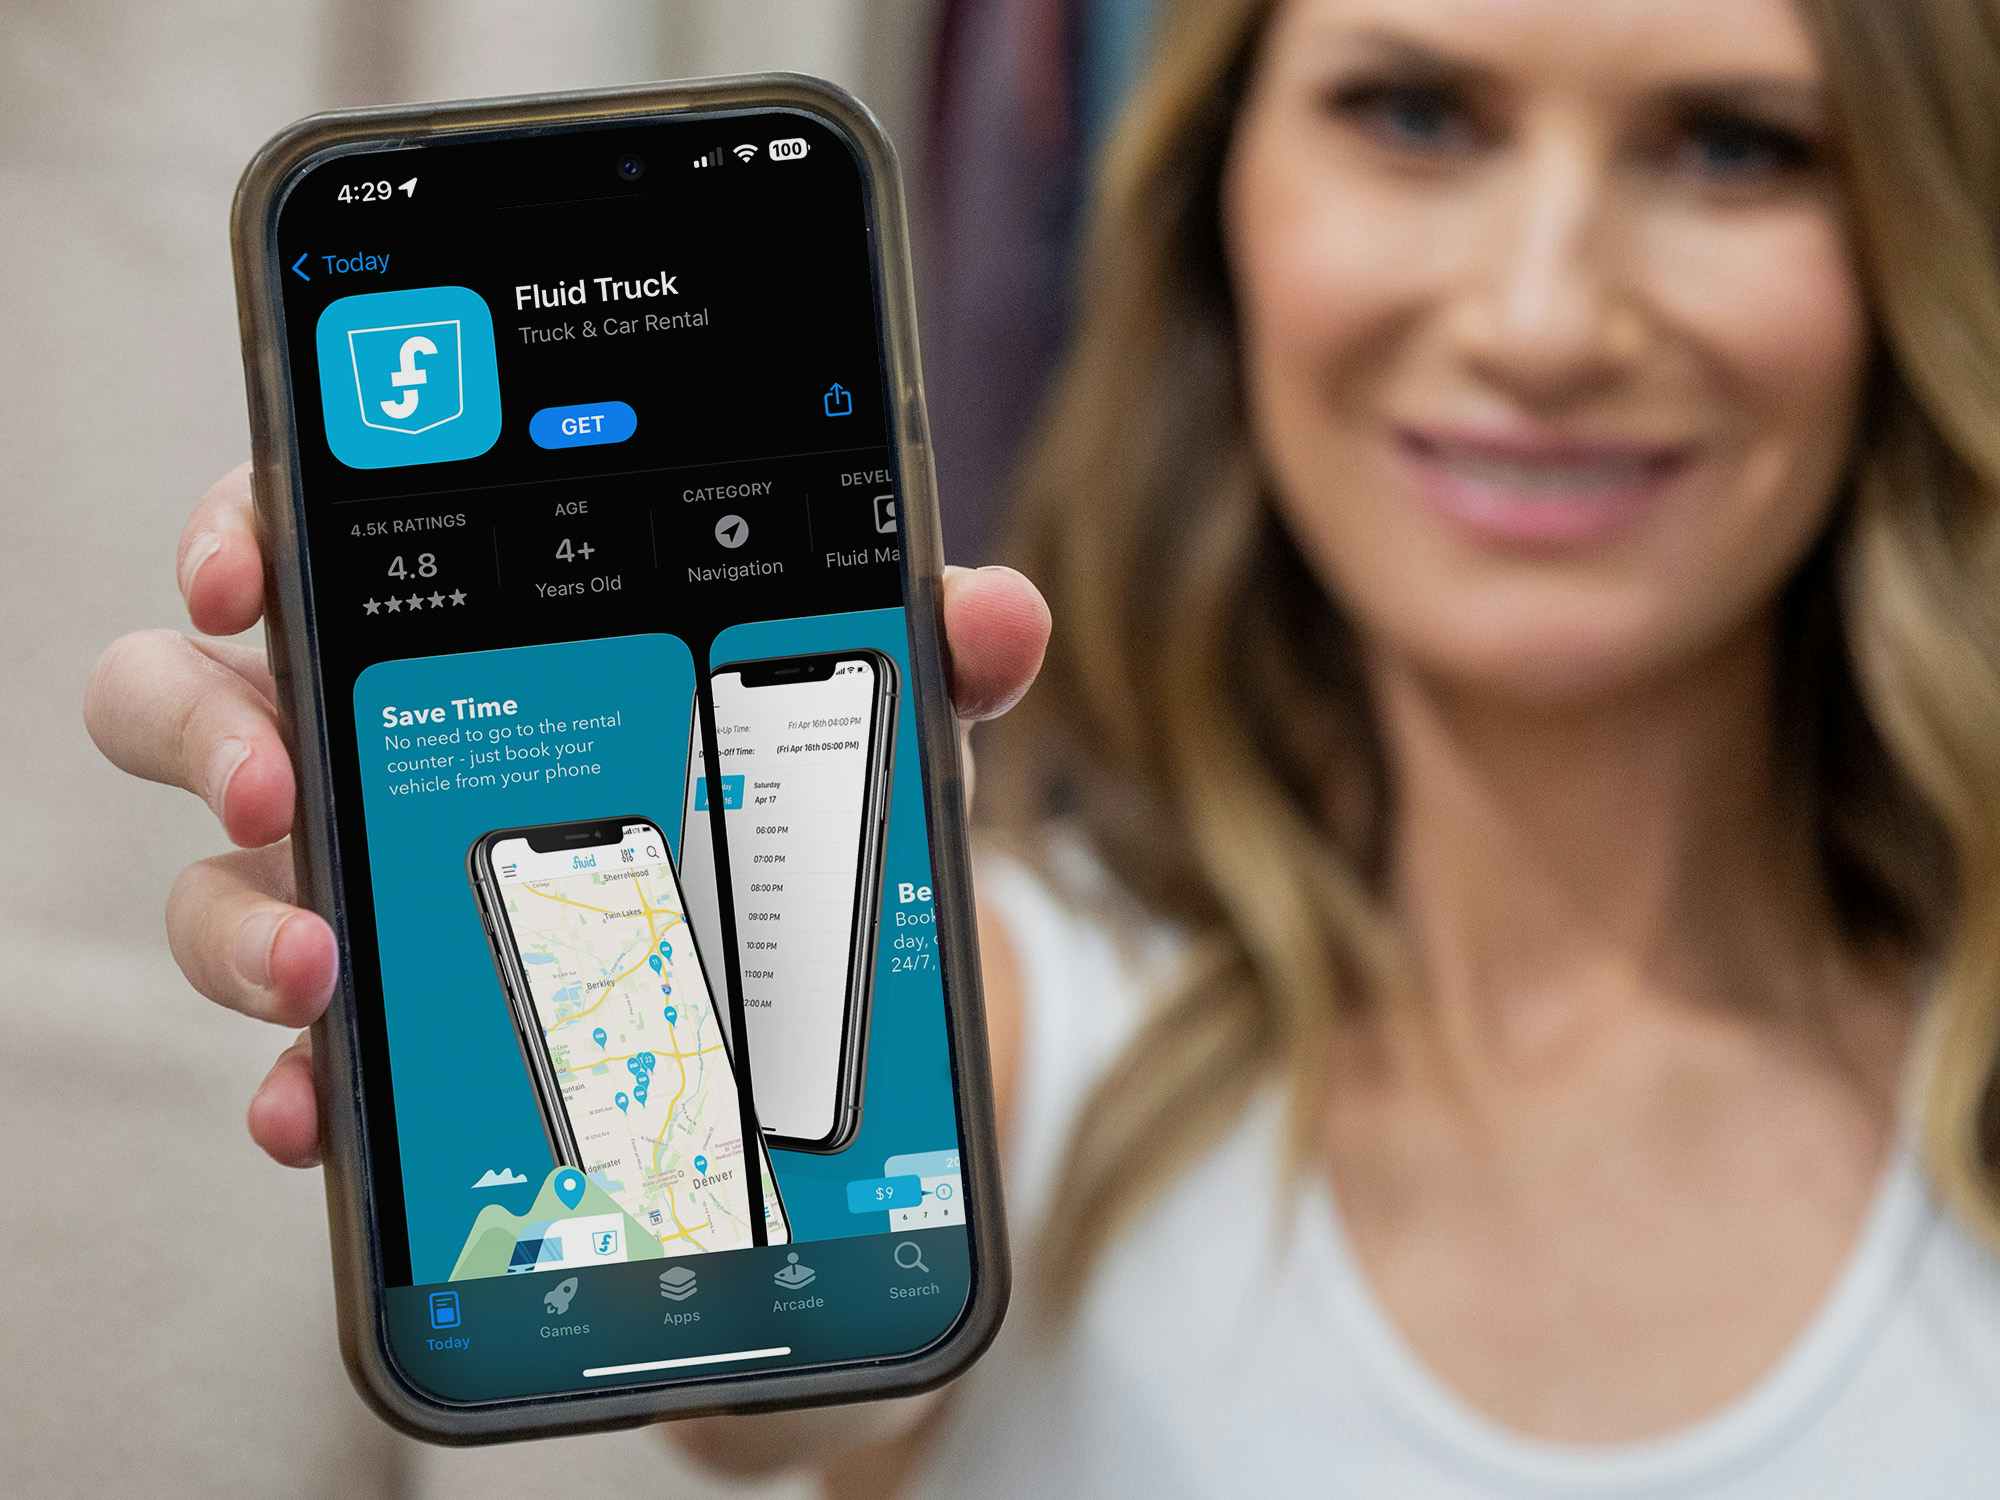 A person holding up a phone displaying the App Store page for the app FluidTruck